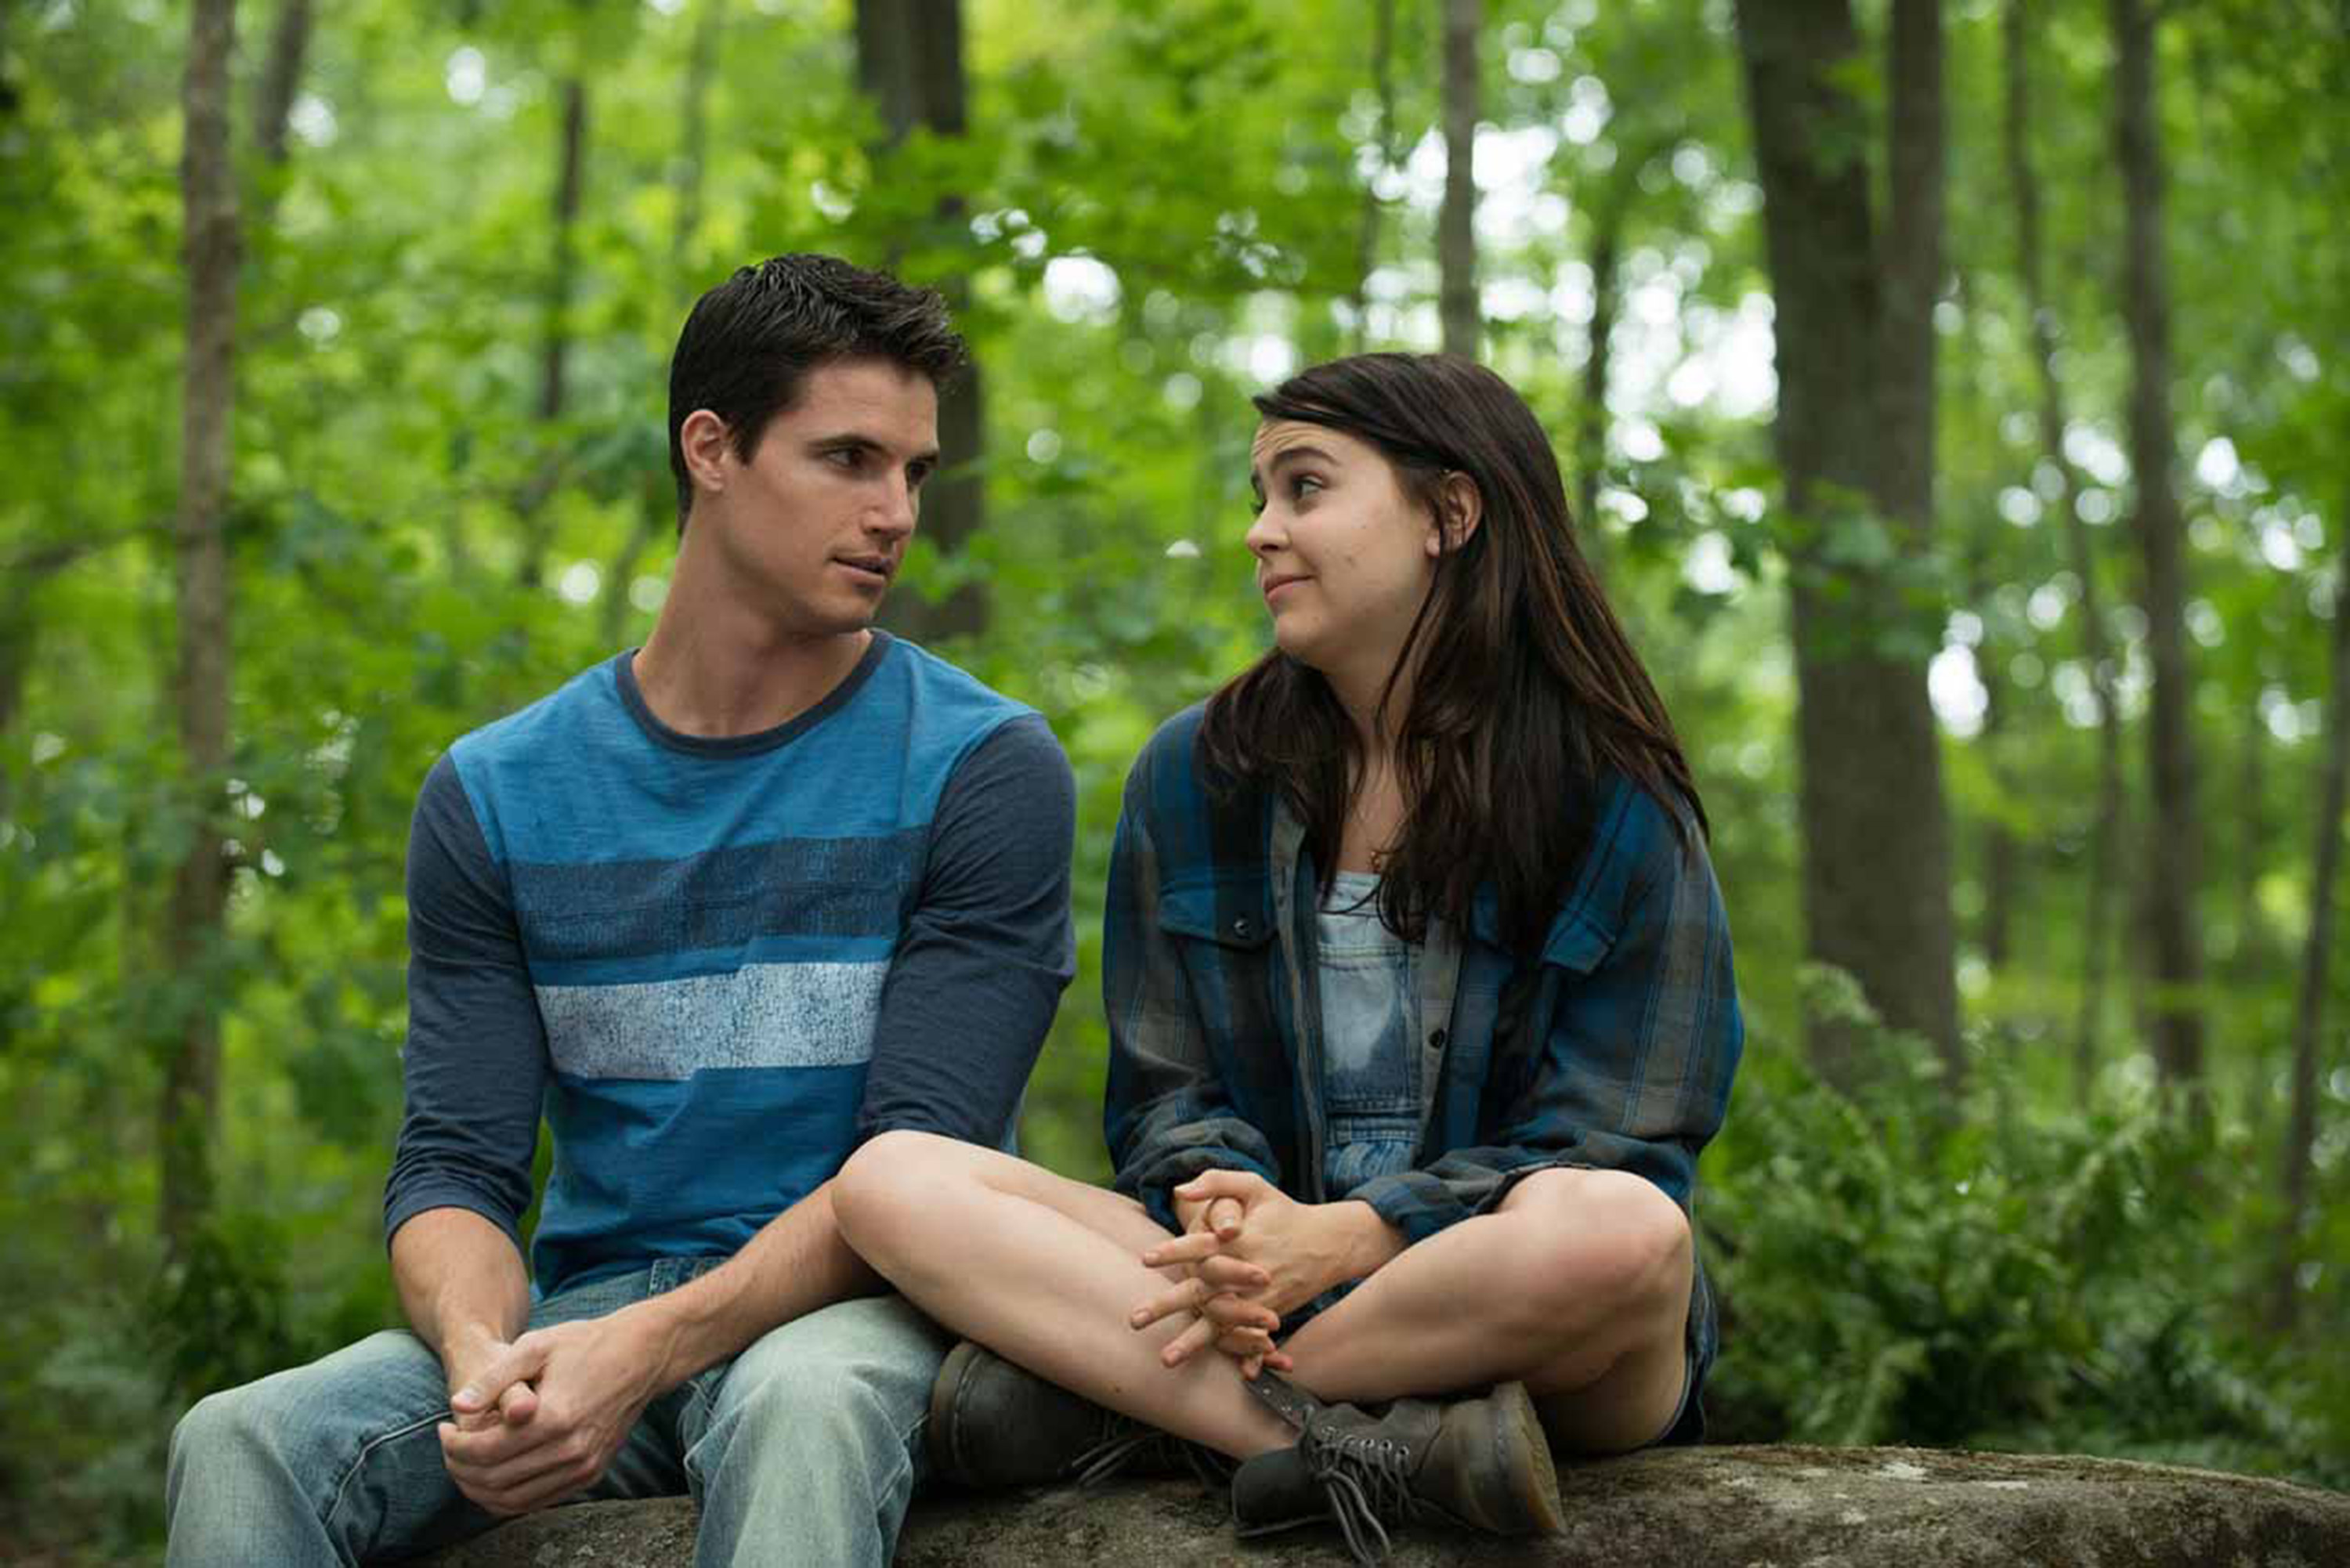 Teen millenials deal with life in ‘The DUFF’